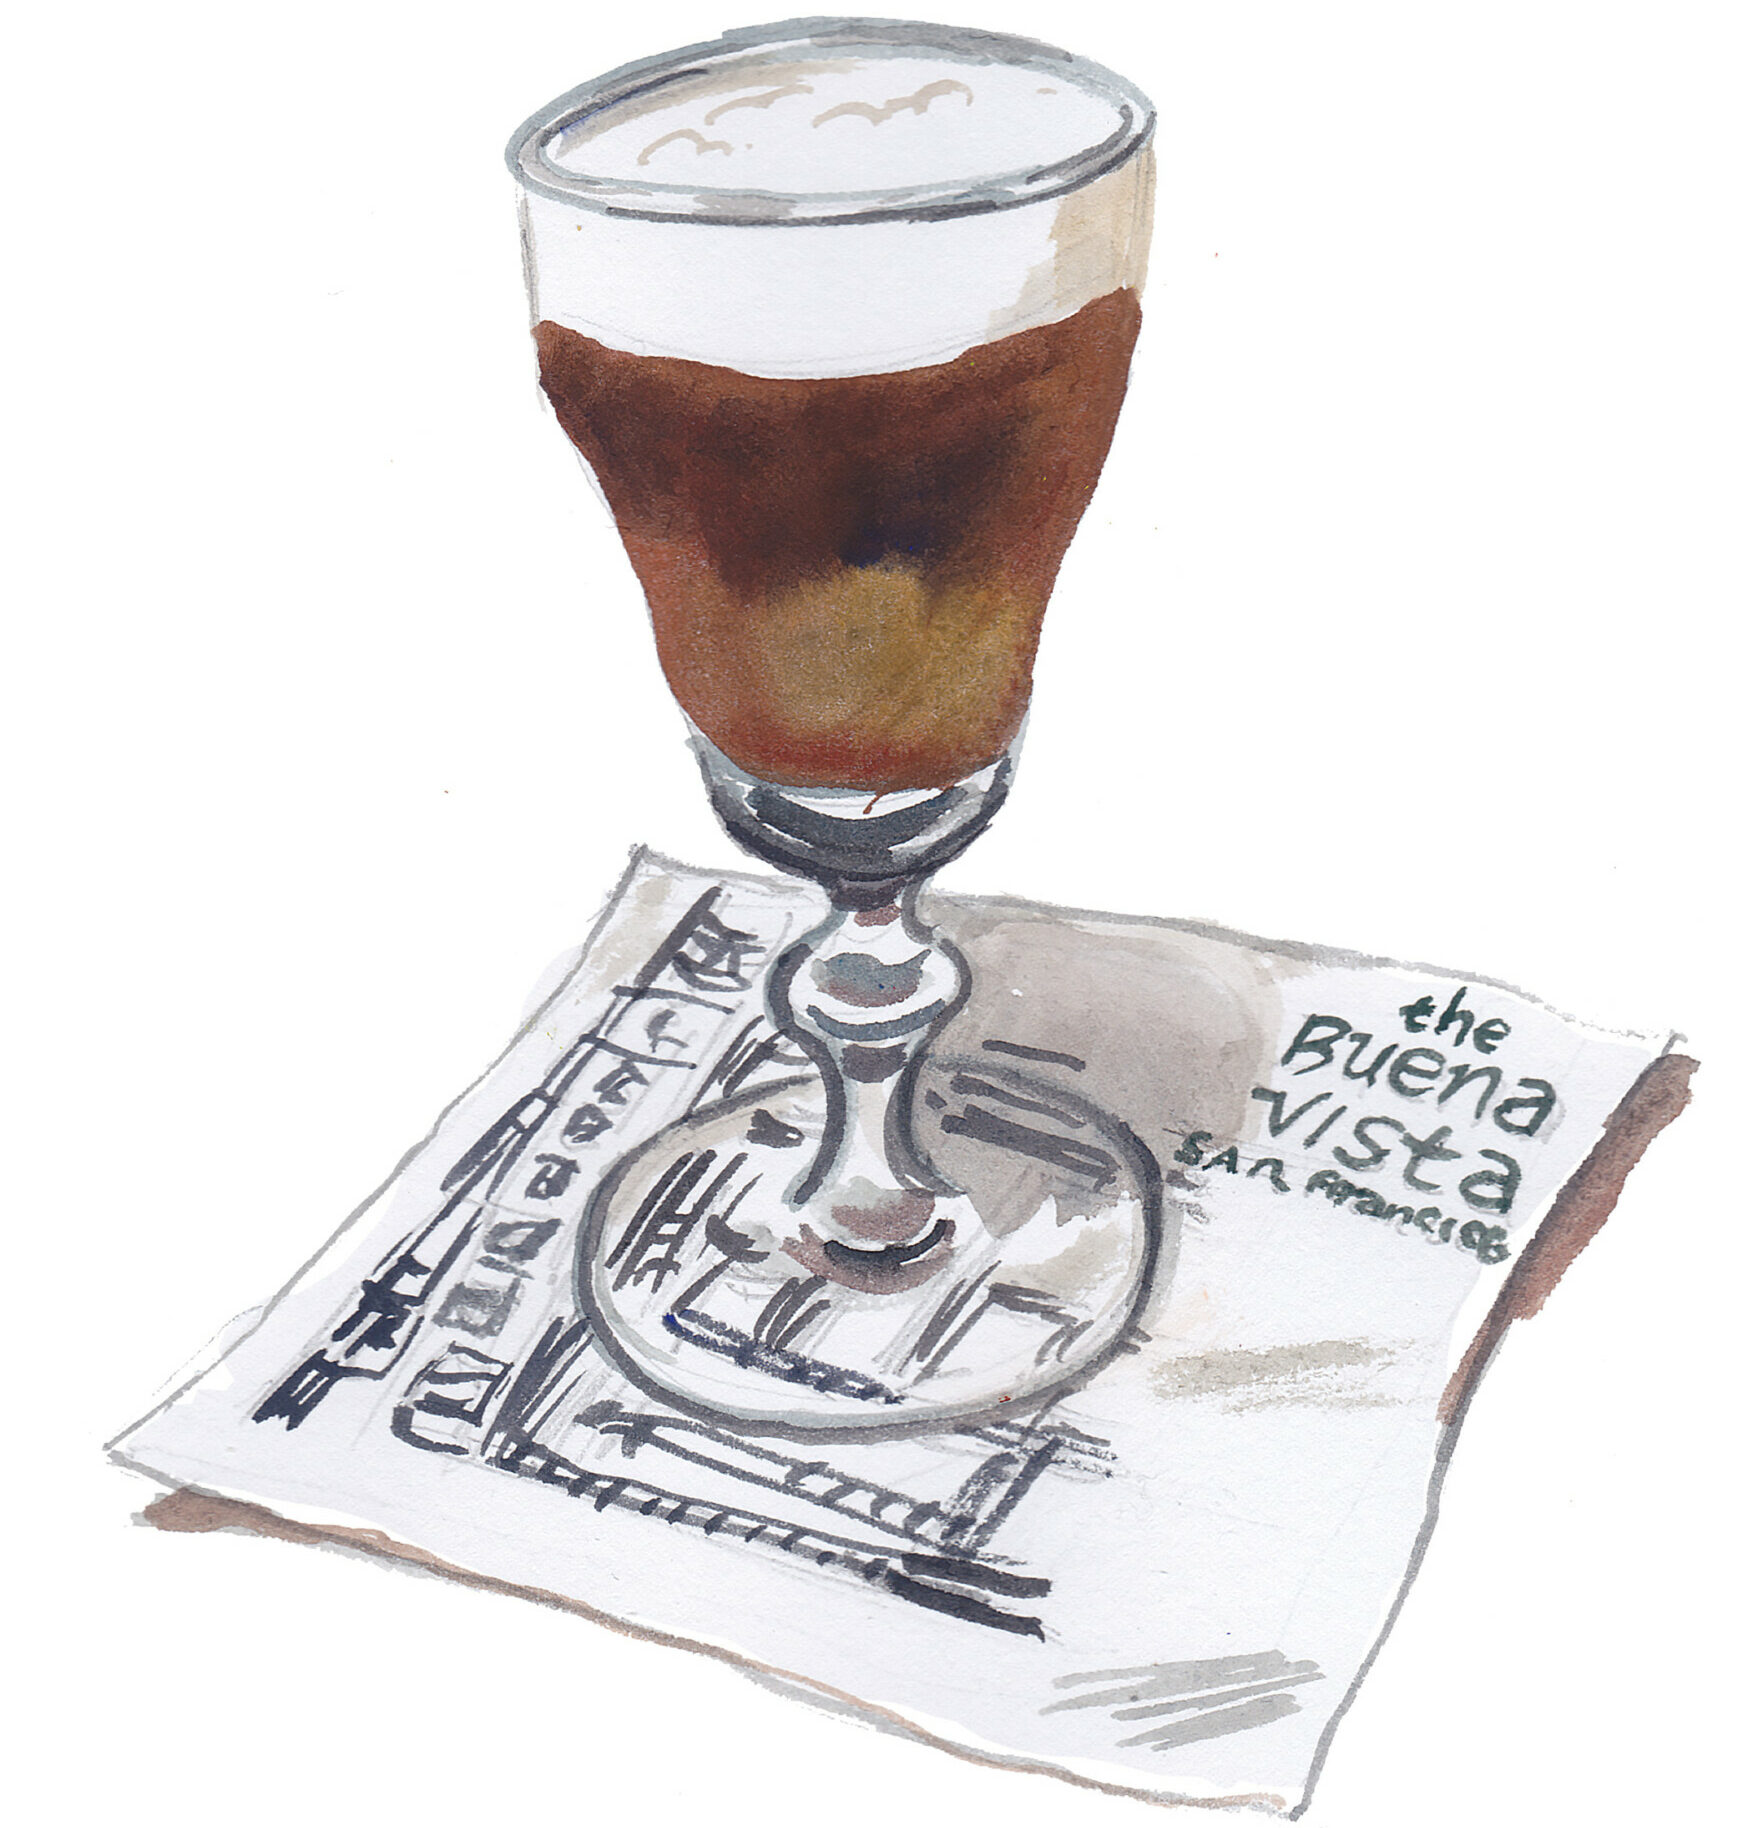 An illustration of a glass of Irish Coffee resting on top of a Buena Vista napkin